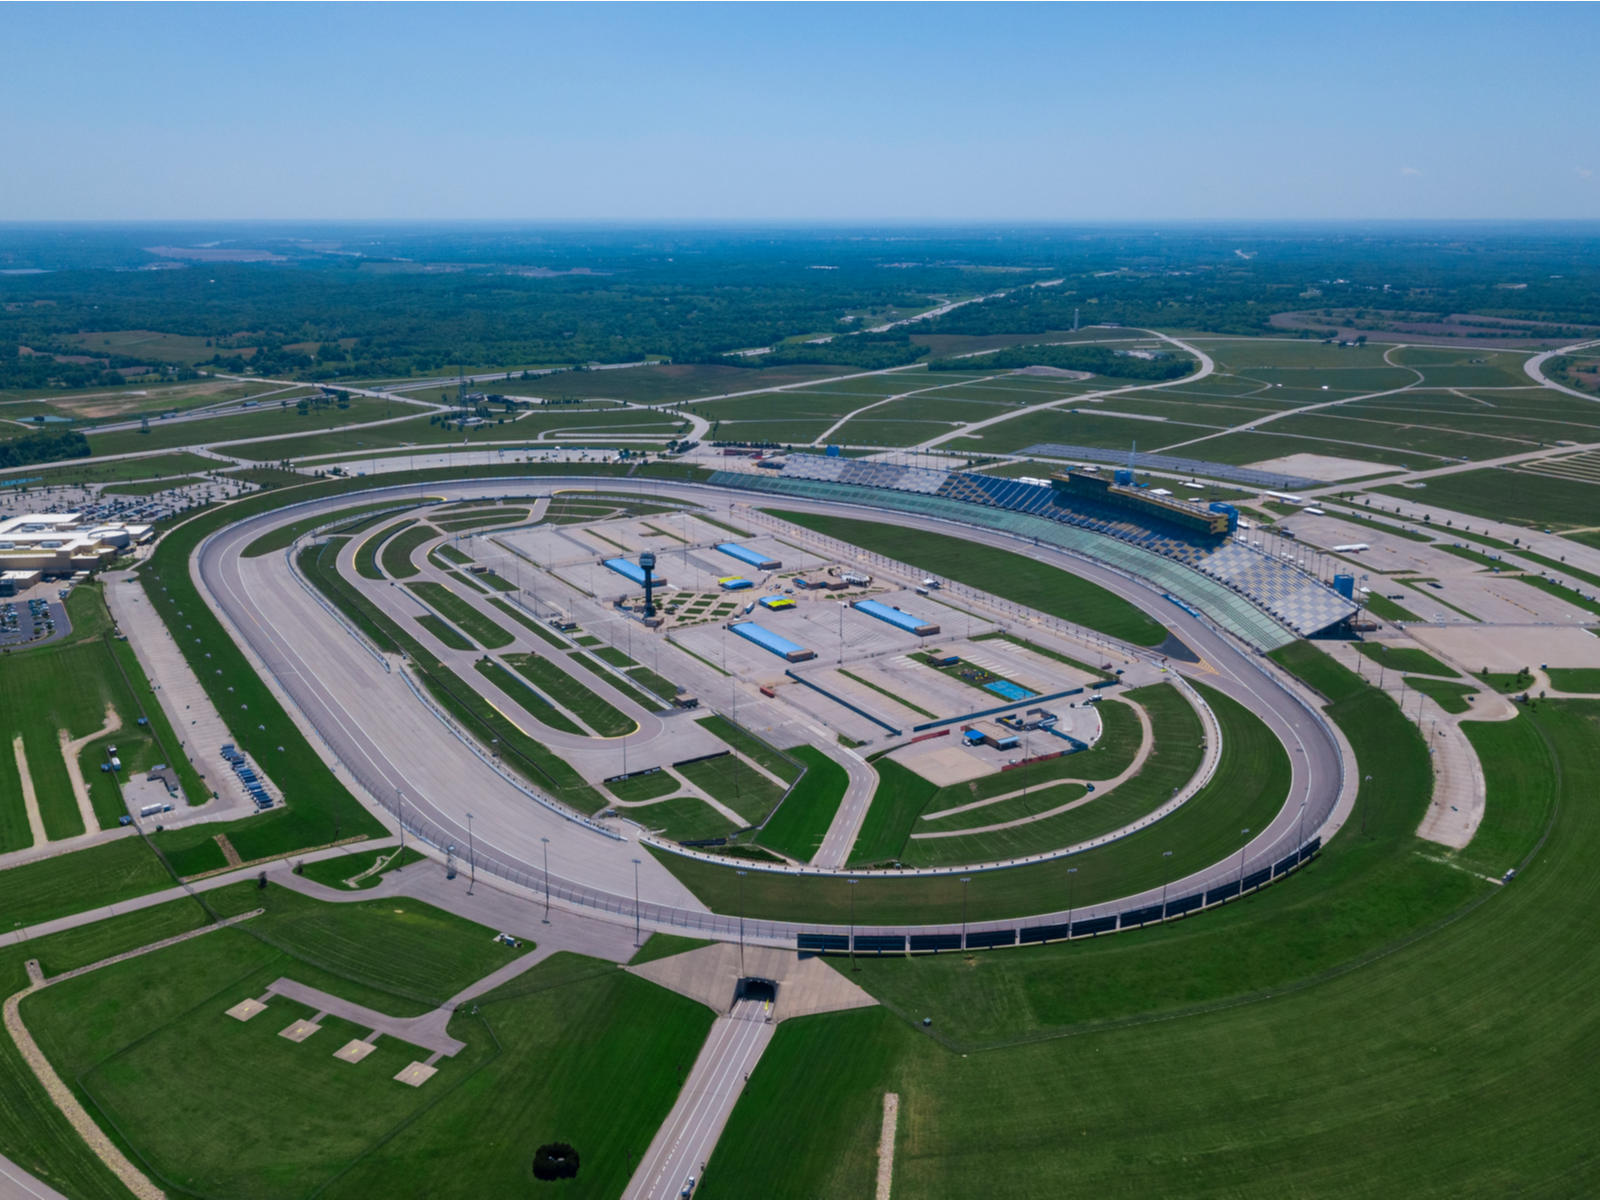 Aerial view of the vast oval auto racing Kansas Speedway, one of the best things to see in Kansas, with neat green landscape and curve roads